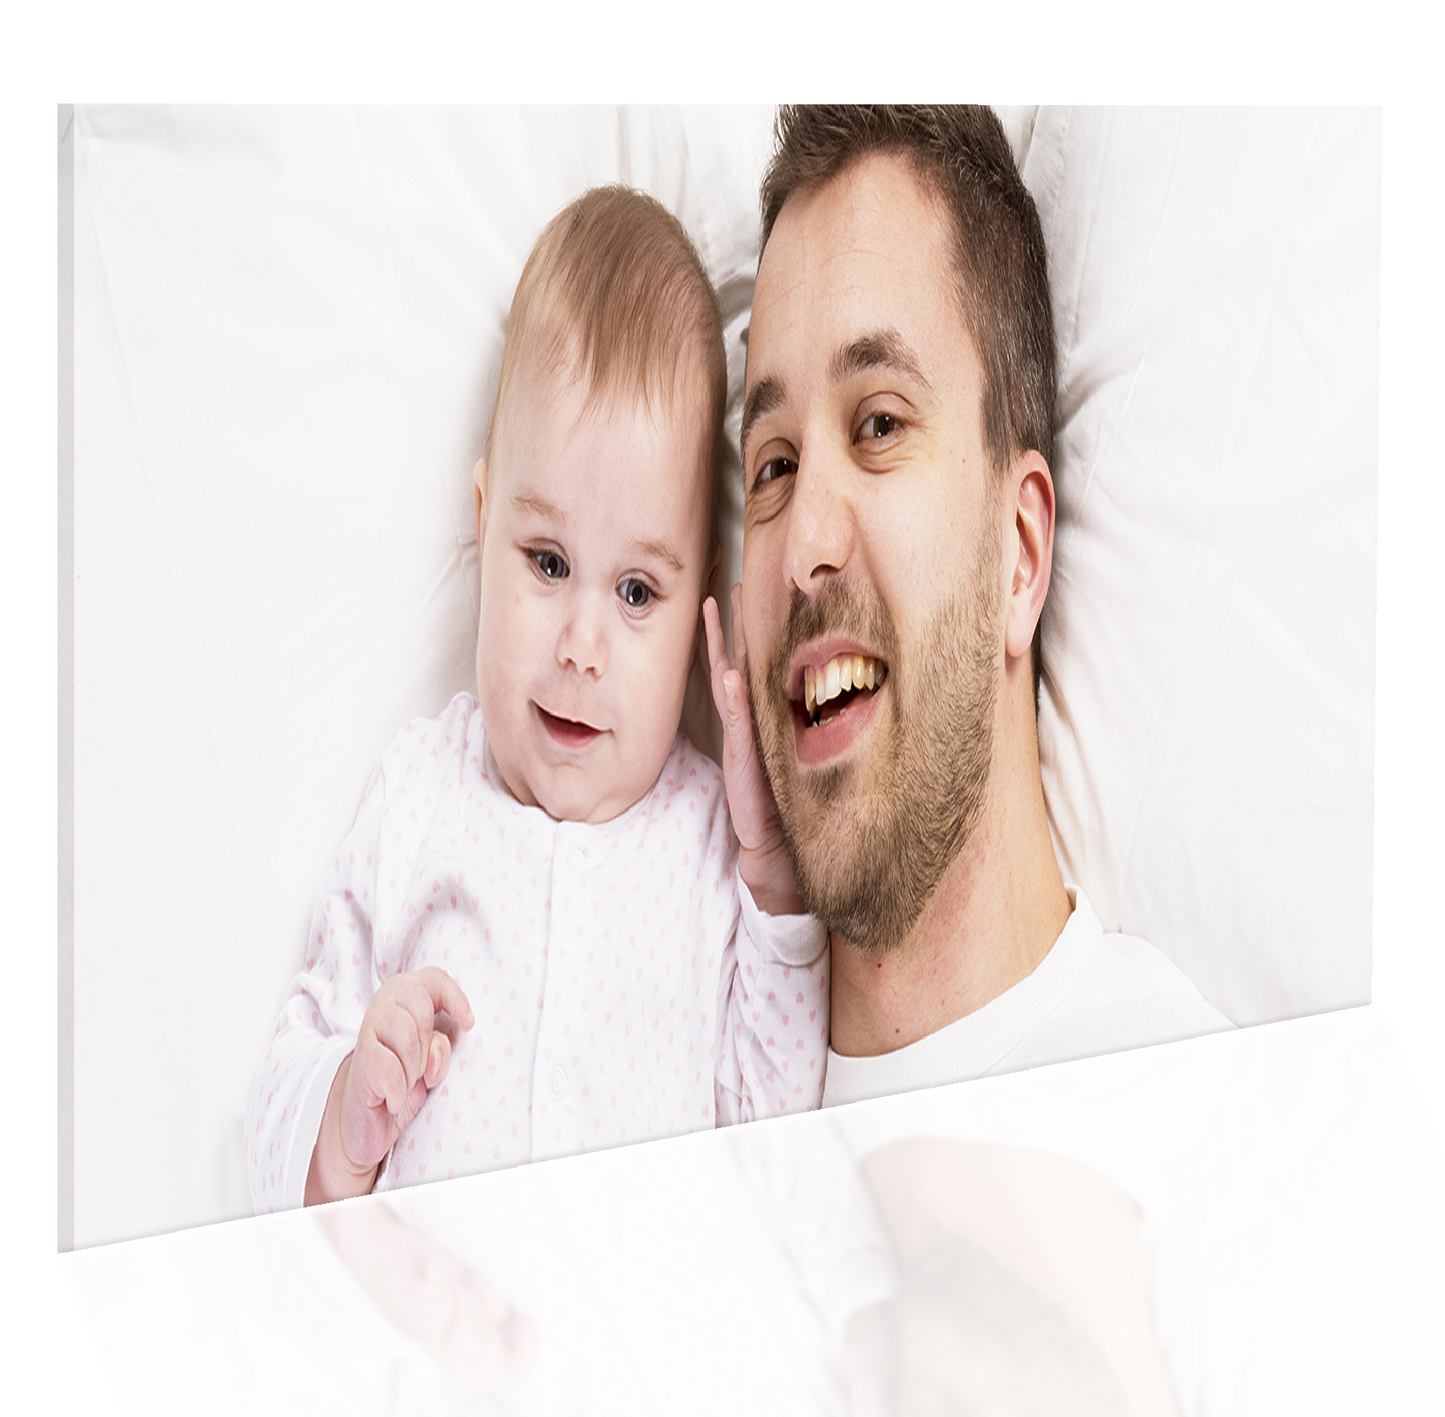 High quality photo acrylic panels. Bring your favorite photo to life with these stunning panels. Ready to hang. Produced in Finglsa, Dublin.  Simply upload your photo online  and let us take care of the rest. Ph: 085 2500151